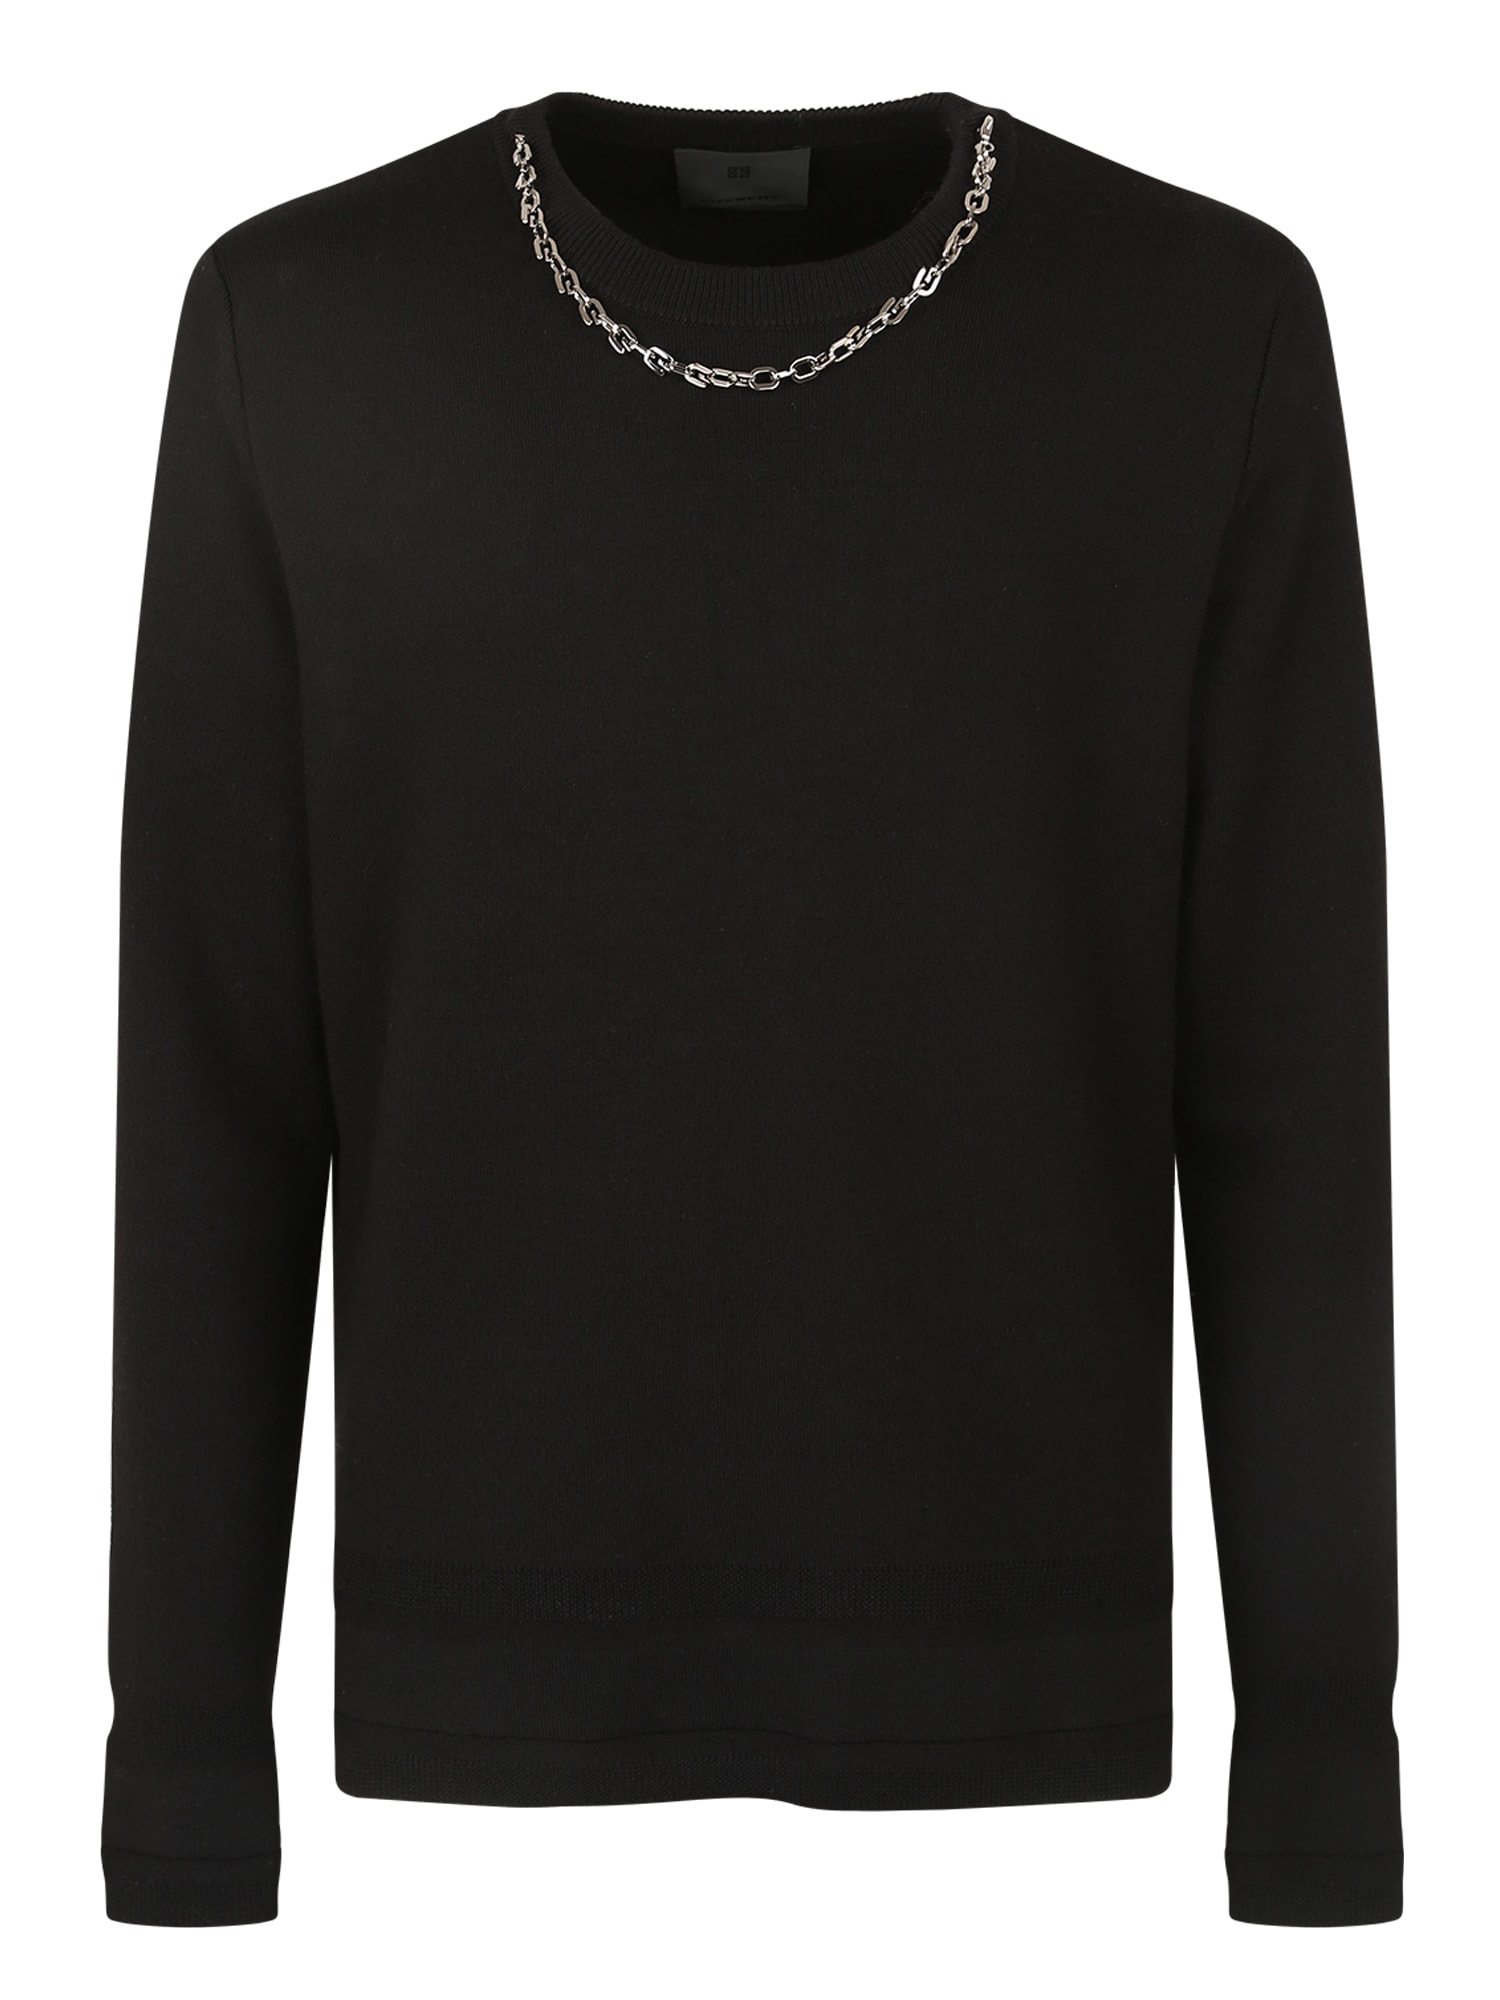 Givenchy Chain-detail Jumper